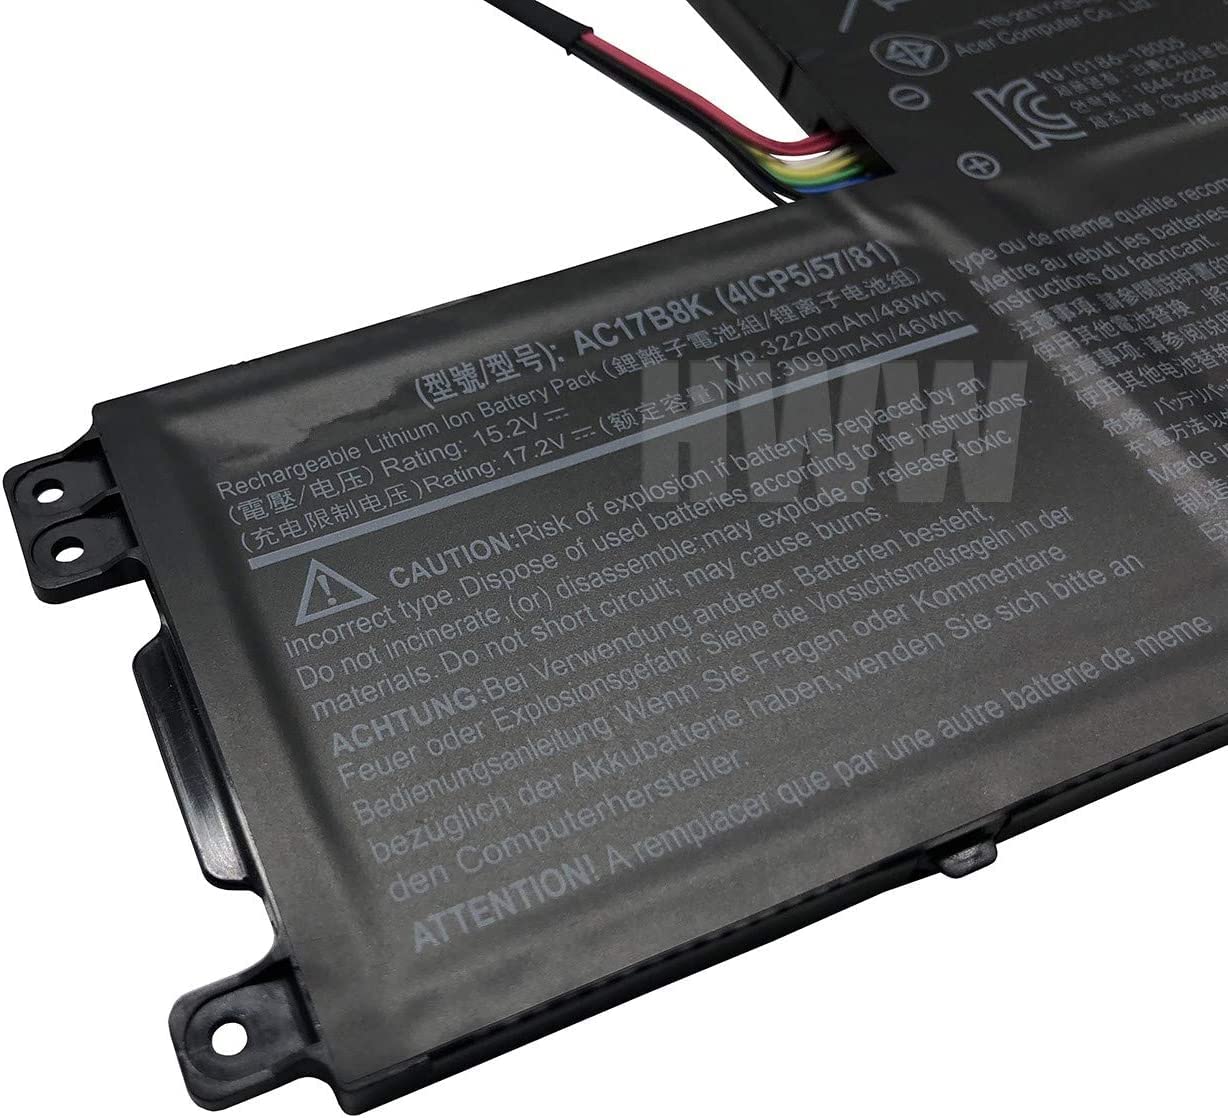 WISTAR AC17B8K Laptop Battery Compatible for Acer Swift 3 SF315-52G SF315-52 4ICP5/57/81 KT.0040G.012 Series